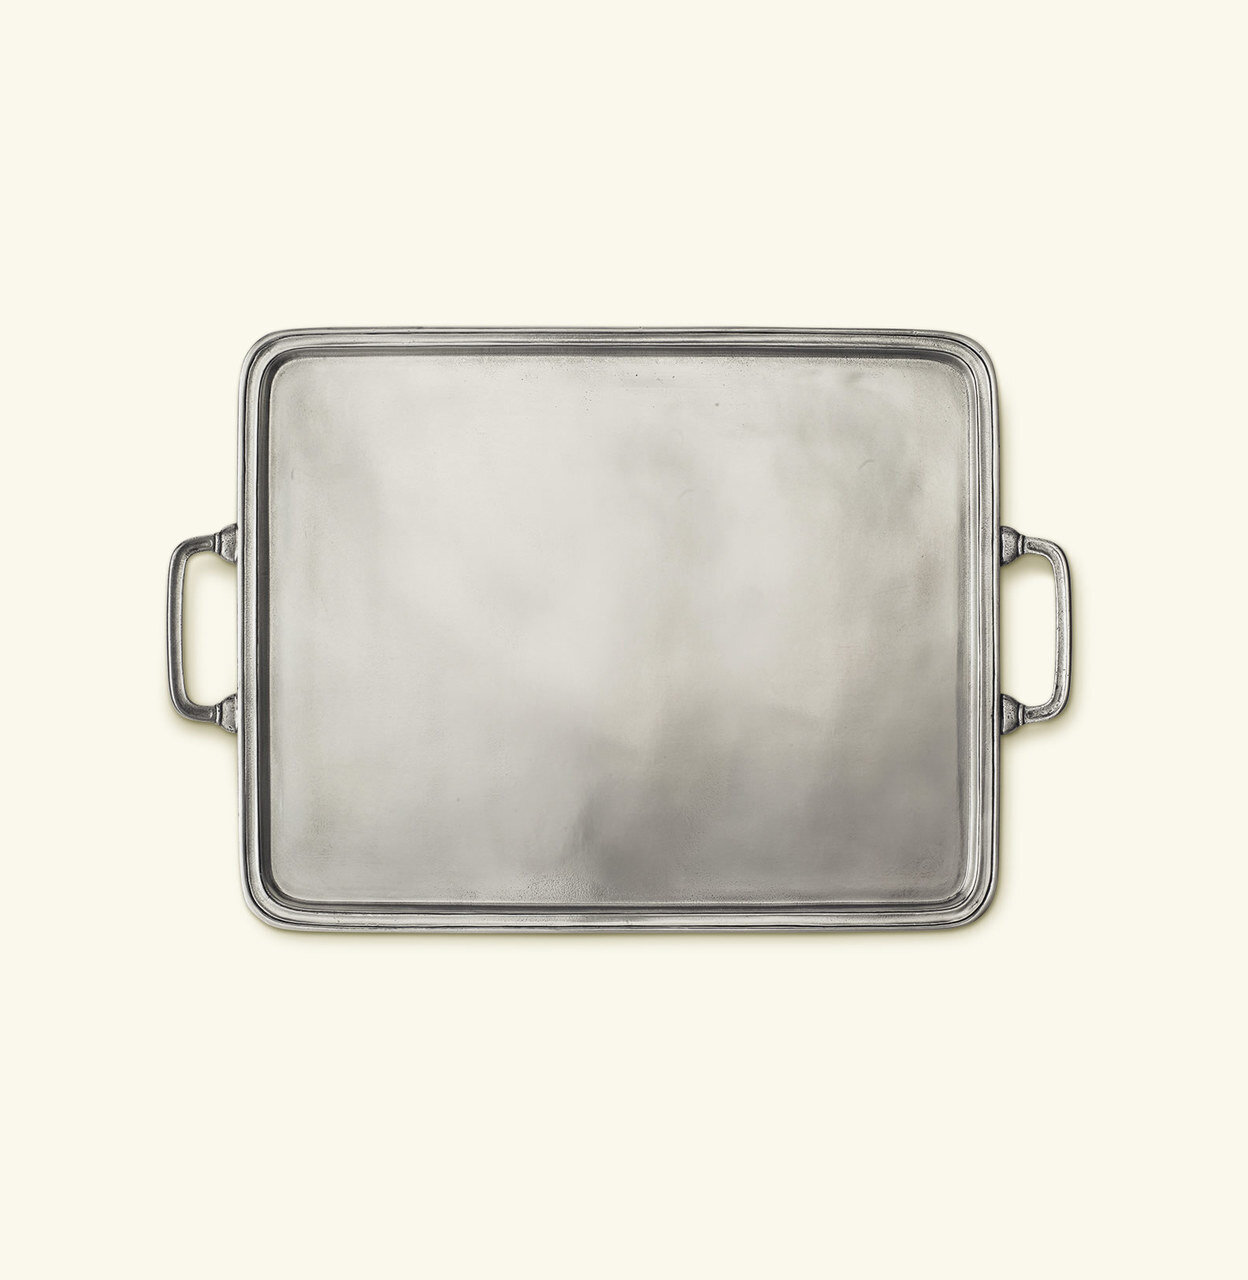 Match Pewter Rectangle Tray With Handles X-Large 964.3